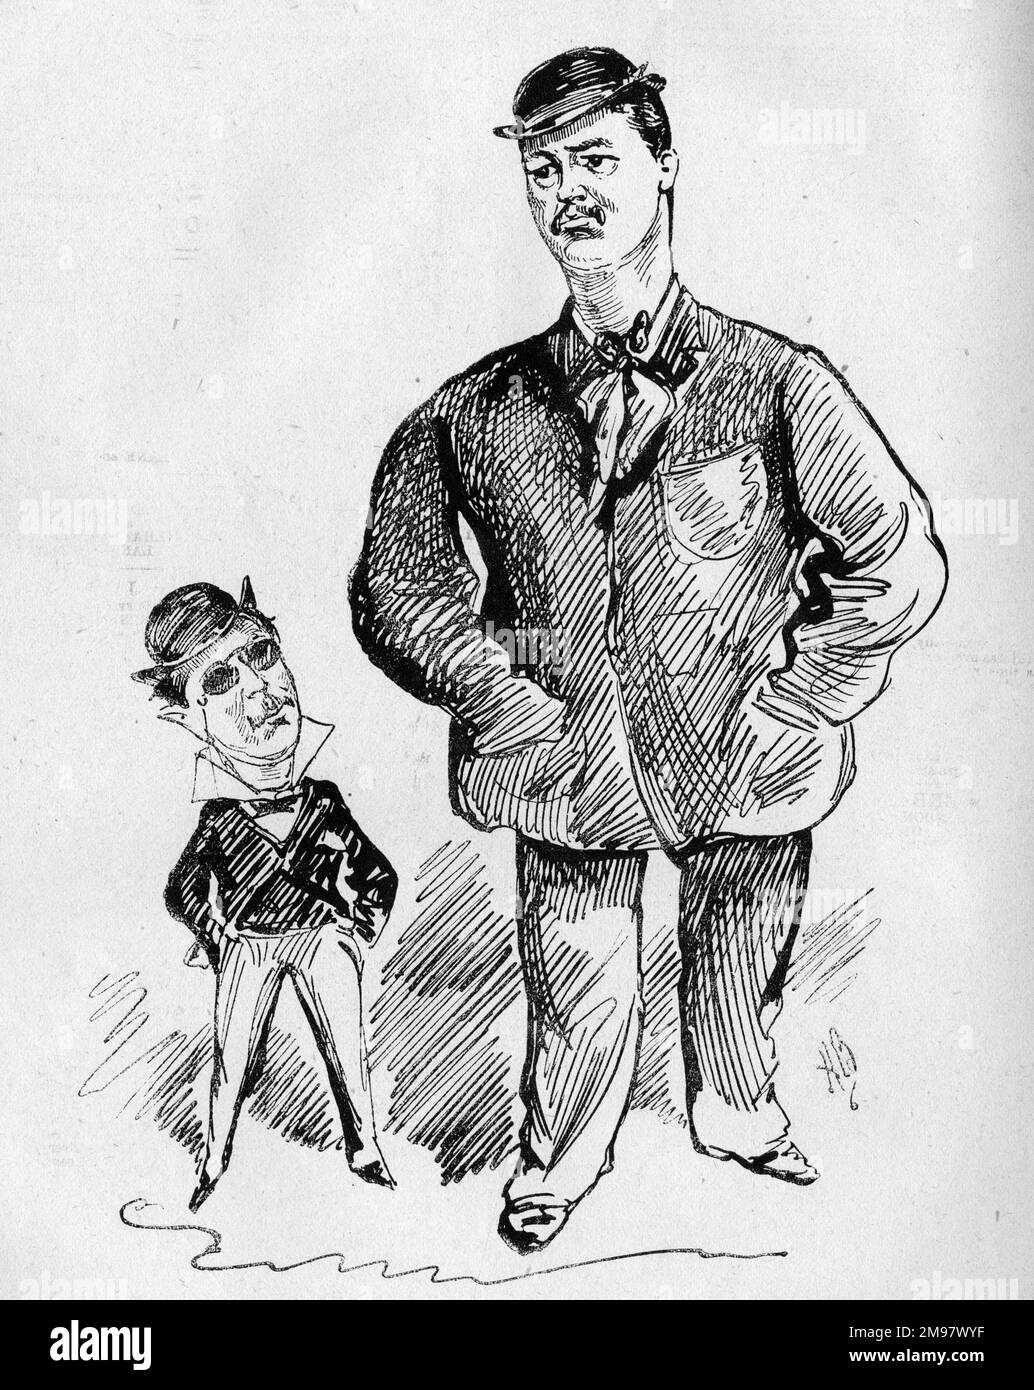 Cartoon of Charles Alias (c1852-1921), theatrical costumier, and Henry Brougham Farnie (1836-1889), author, librettist and adapter -- Opera Bouffe collaborators. Stock Photo